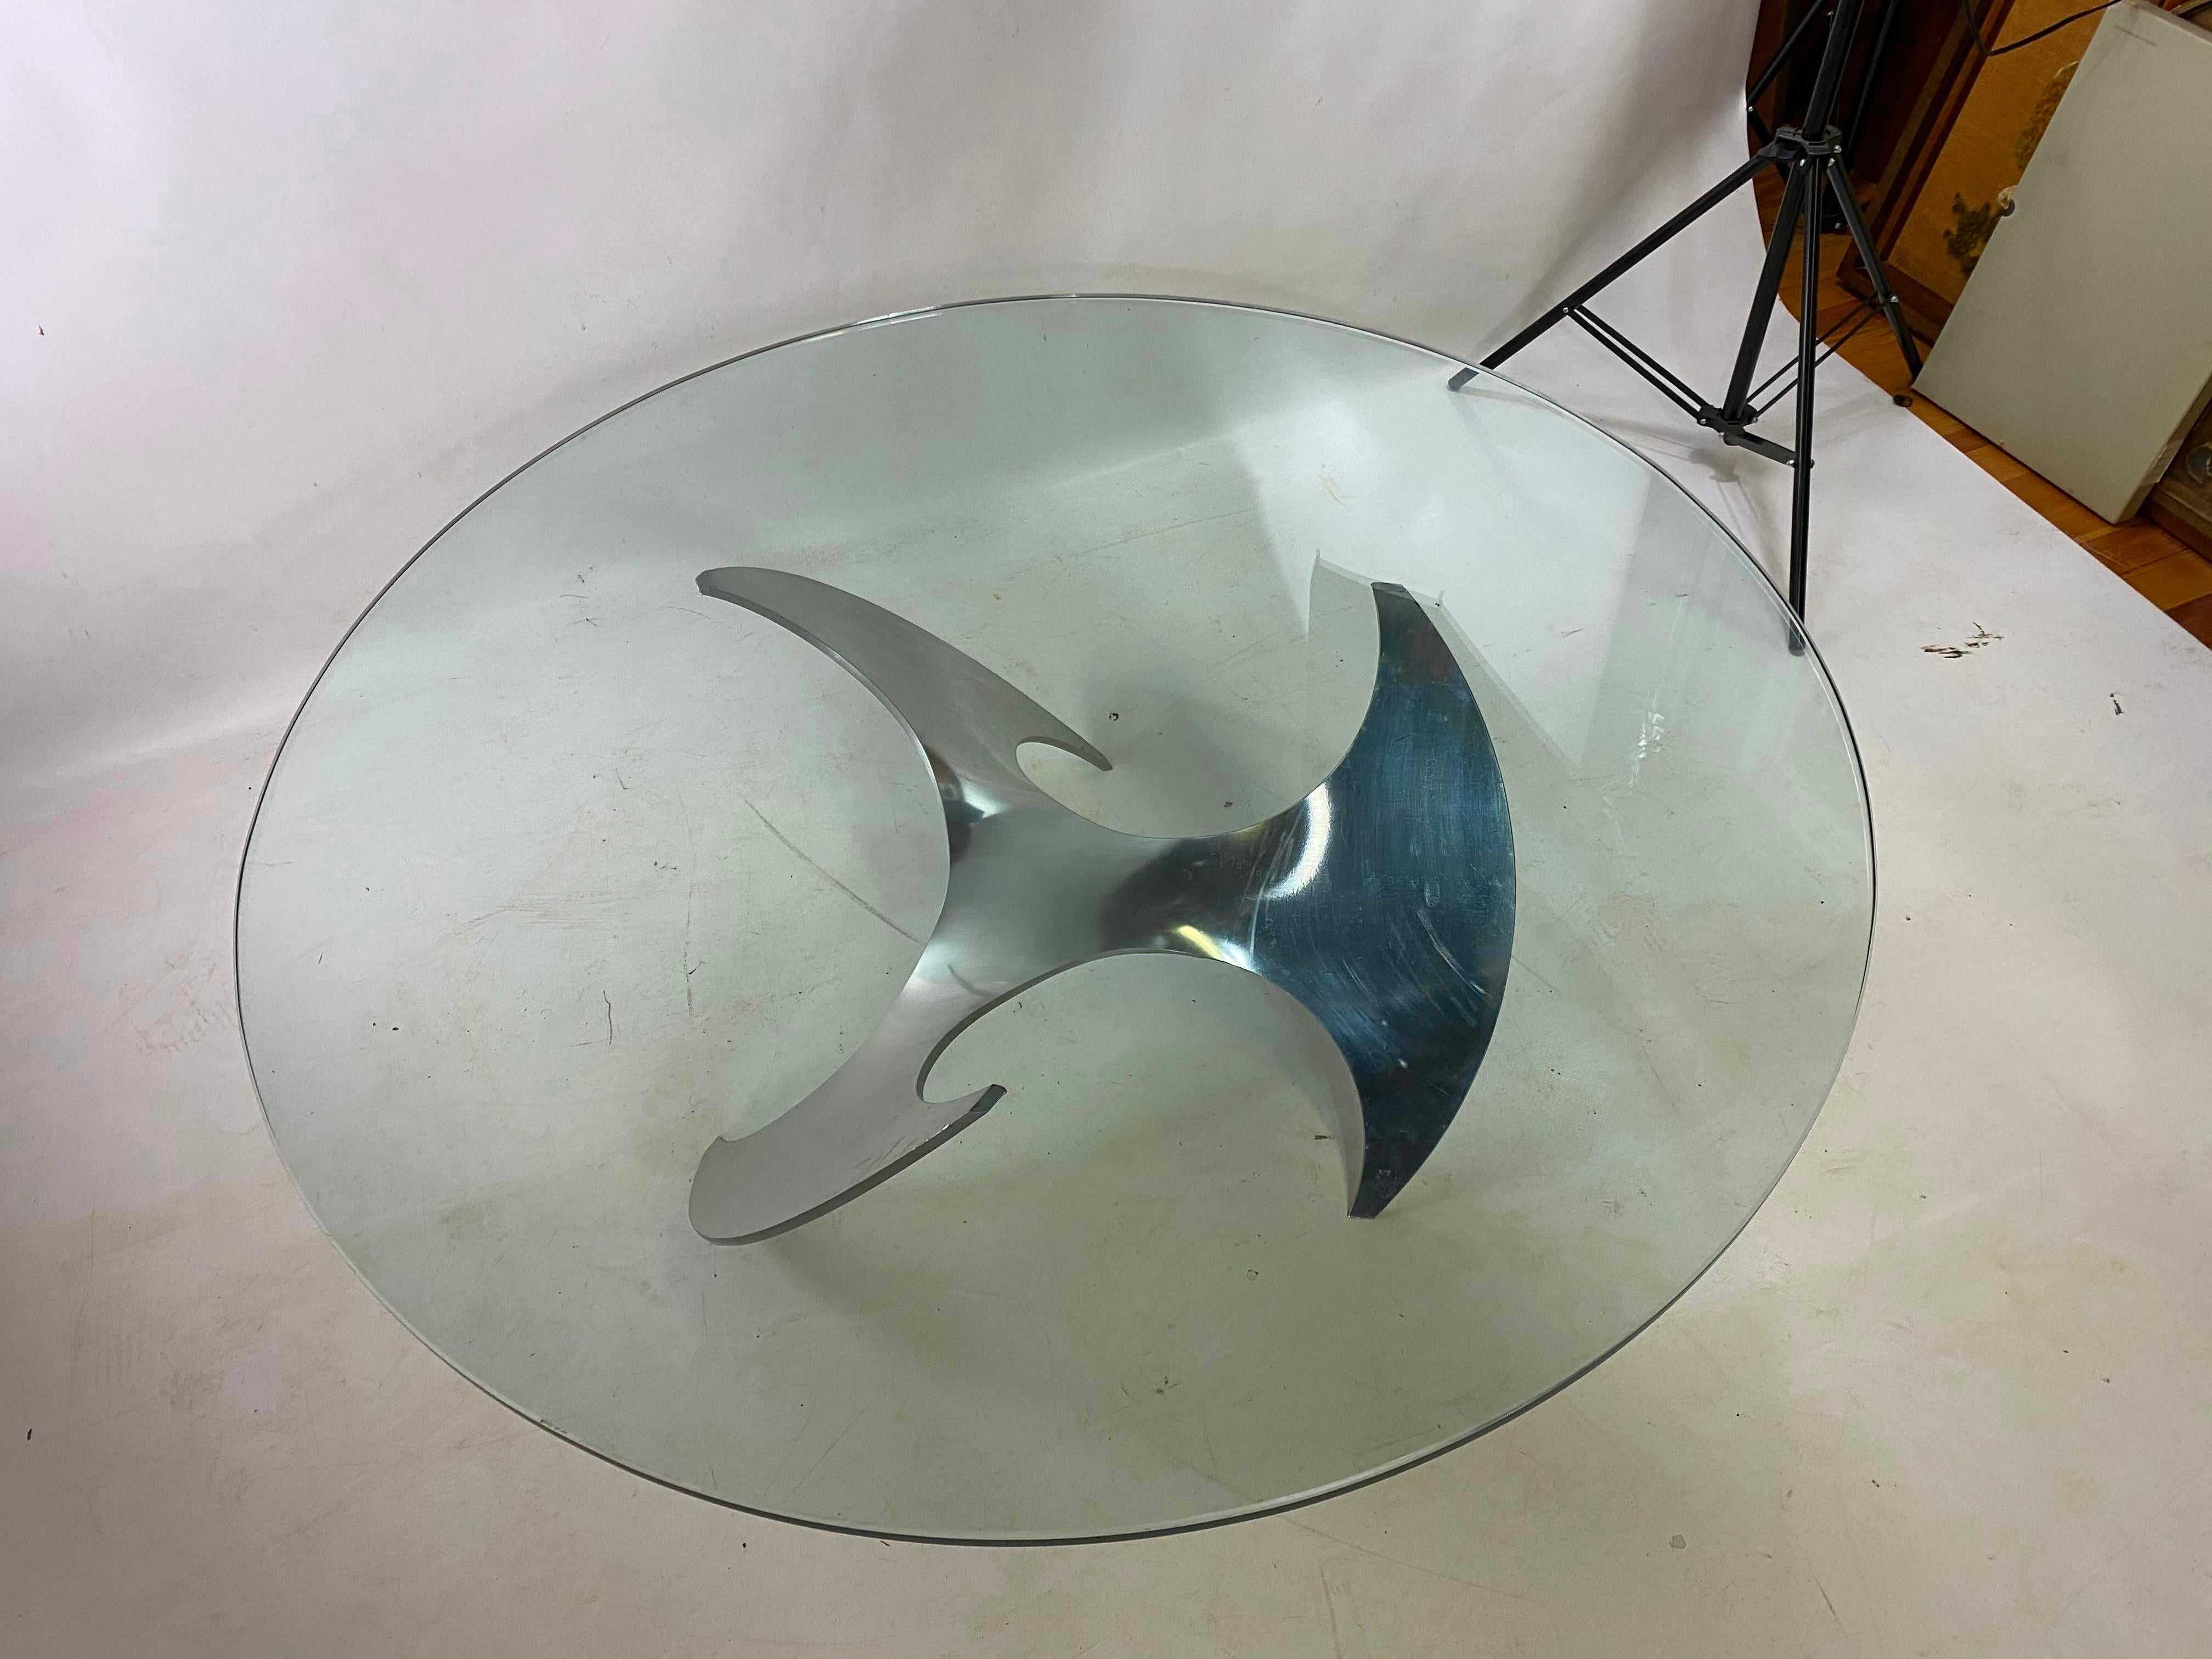 Midcentury aluminum and glass propeller table by Knut Hesterberg.